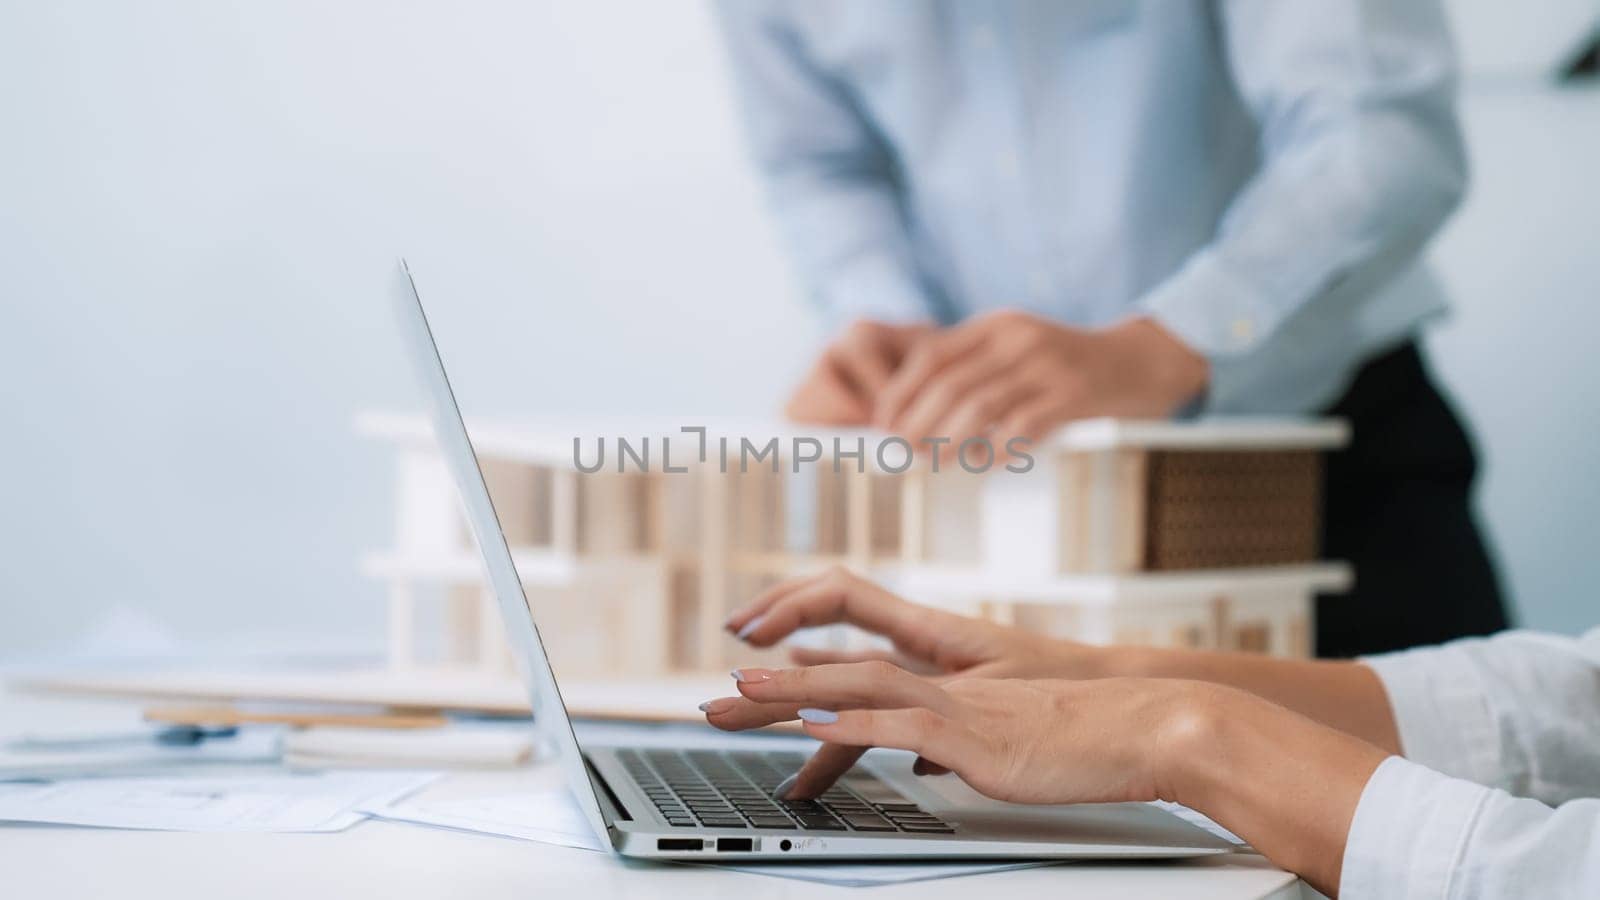 Close-up of young beautiful professional architect hands using laptop with blueprint and architectural document placed on table while male coworker inspects house model. Focus on hand. Immaculate.